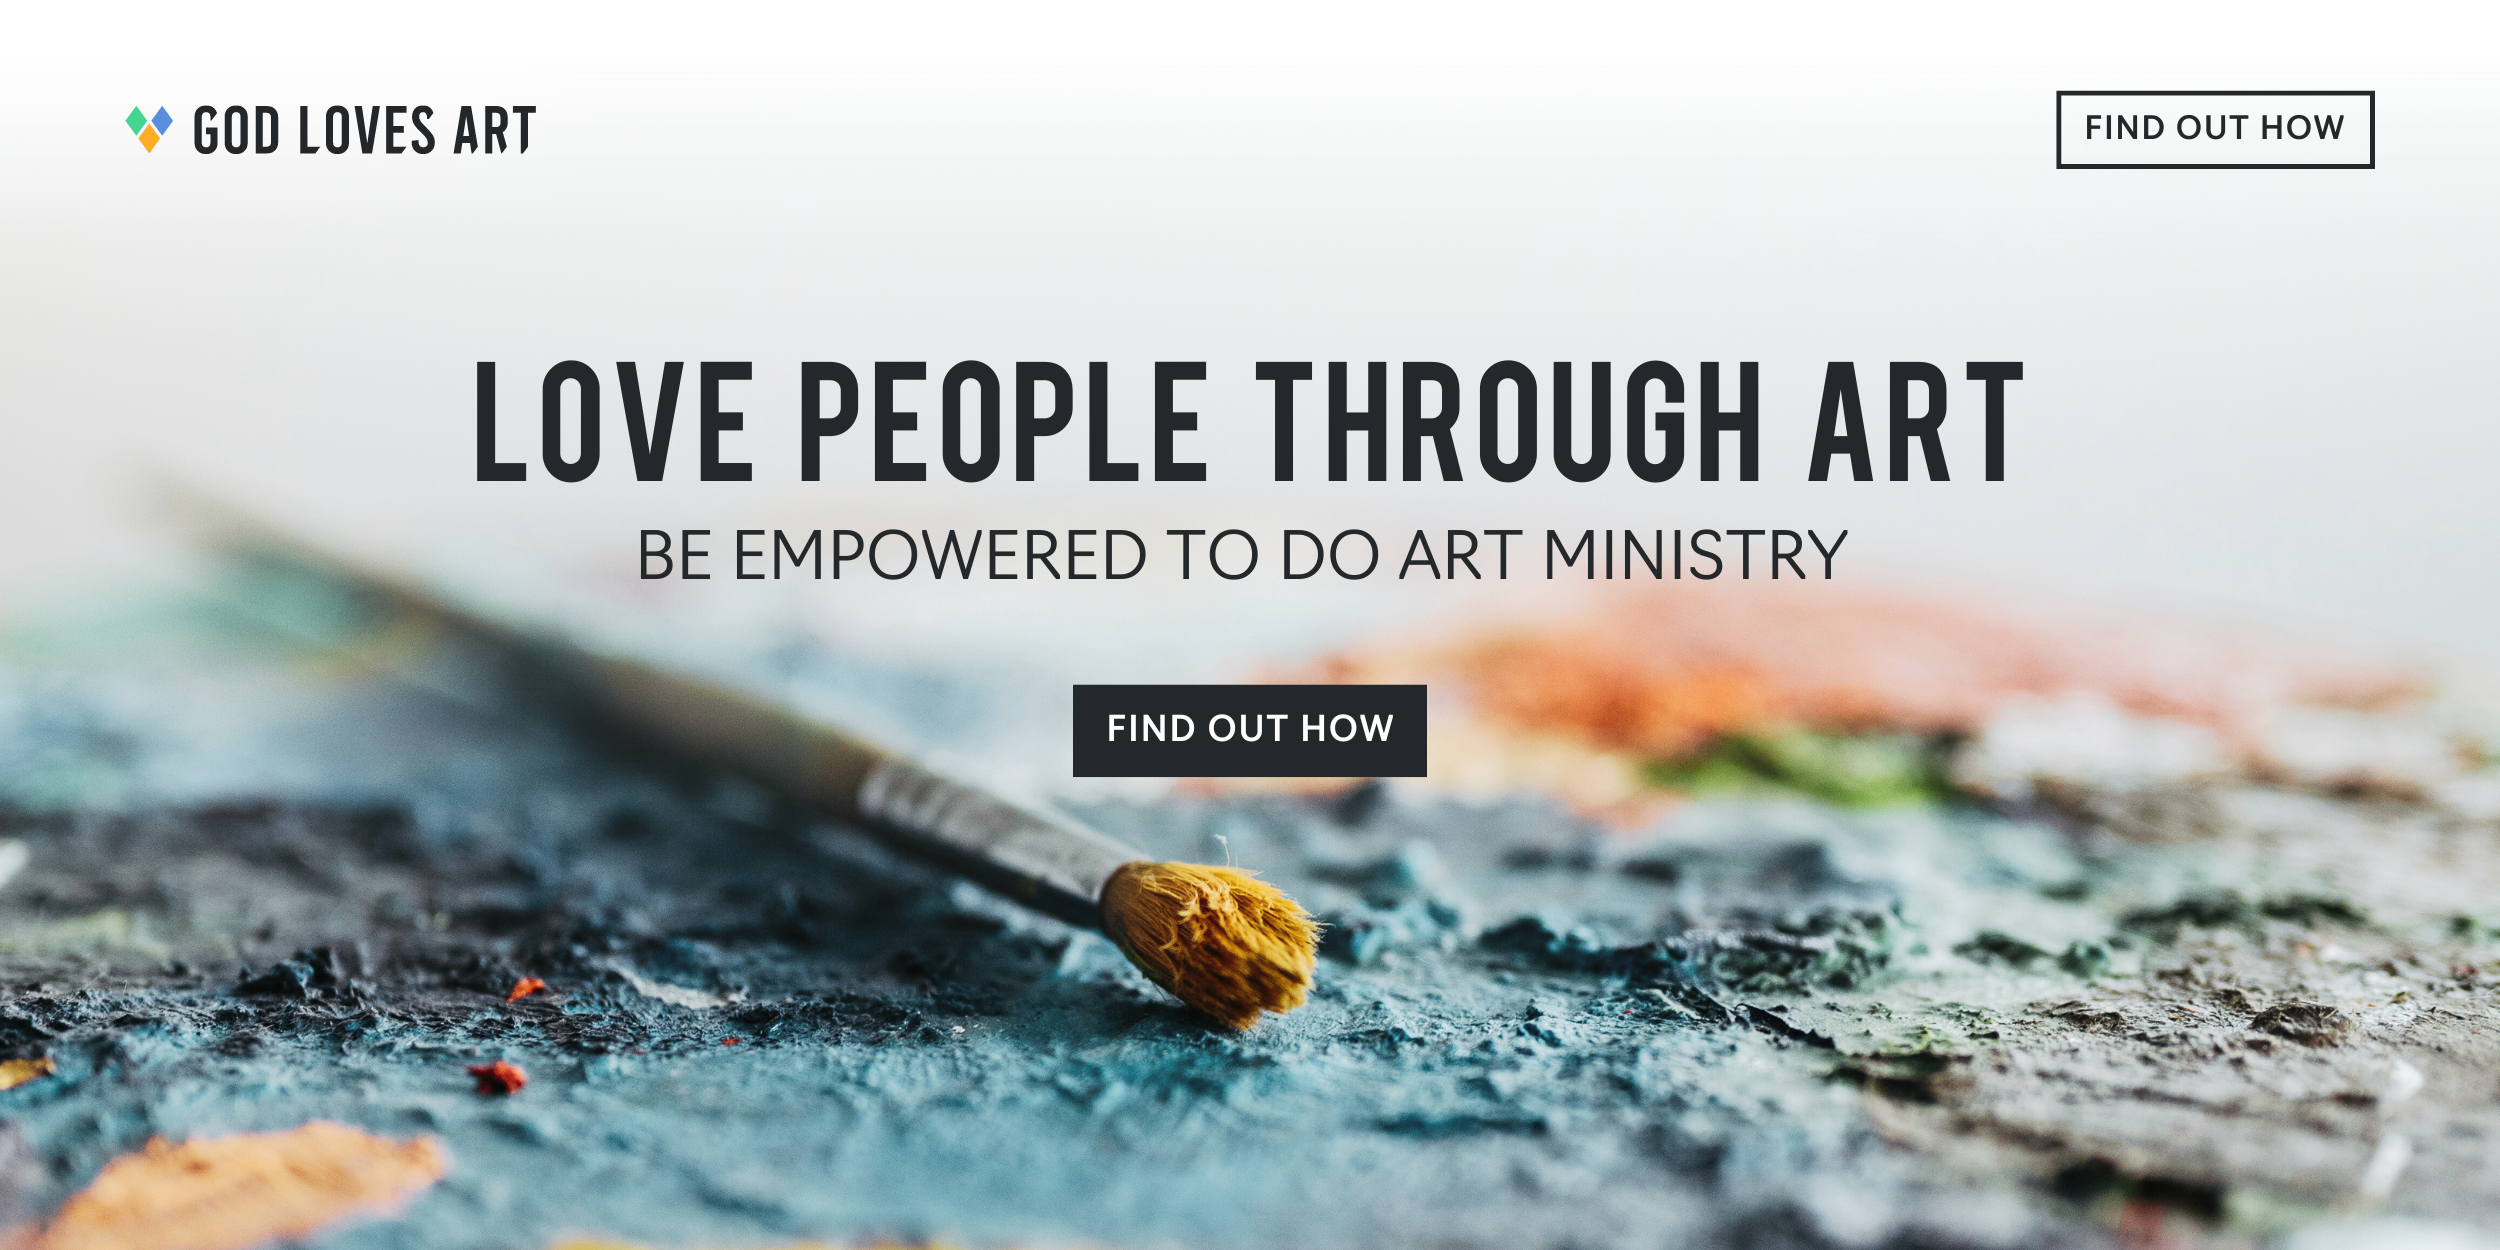 Love people through art. Be empowered to do art ministry. FInd out how.